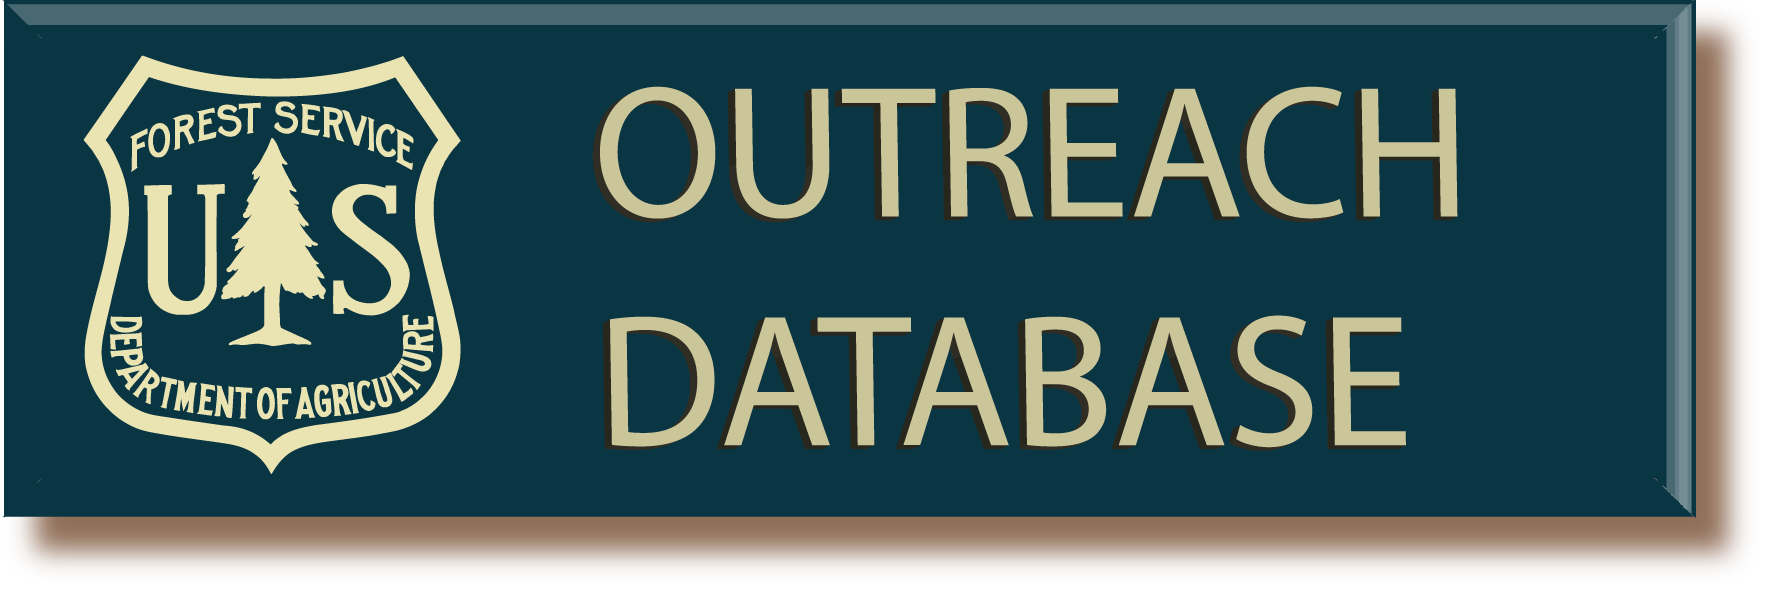 Forest Service Outreach Database